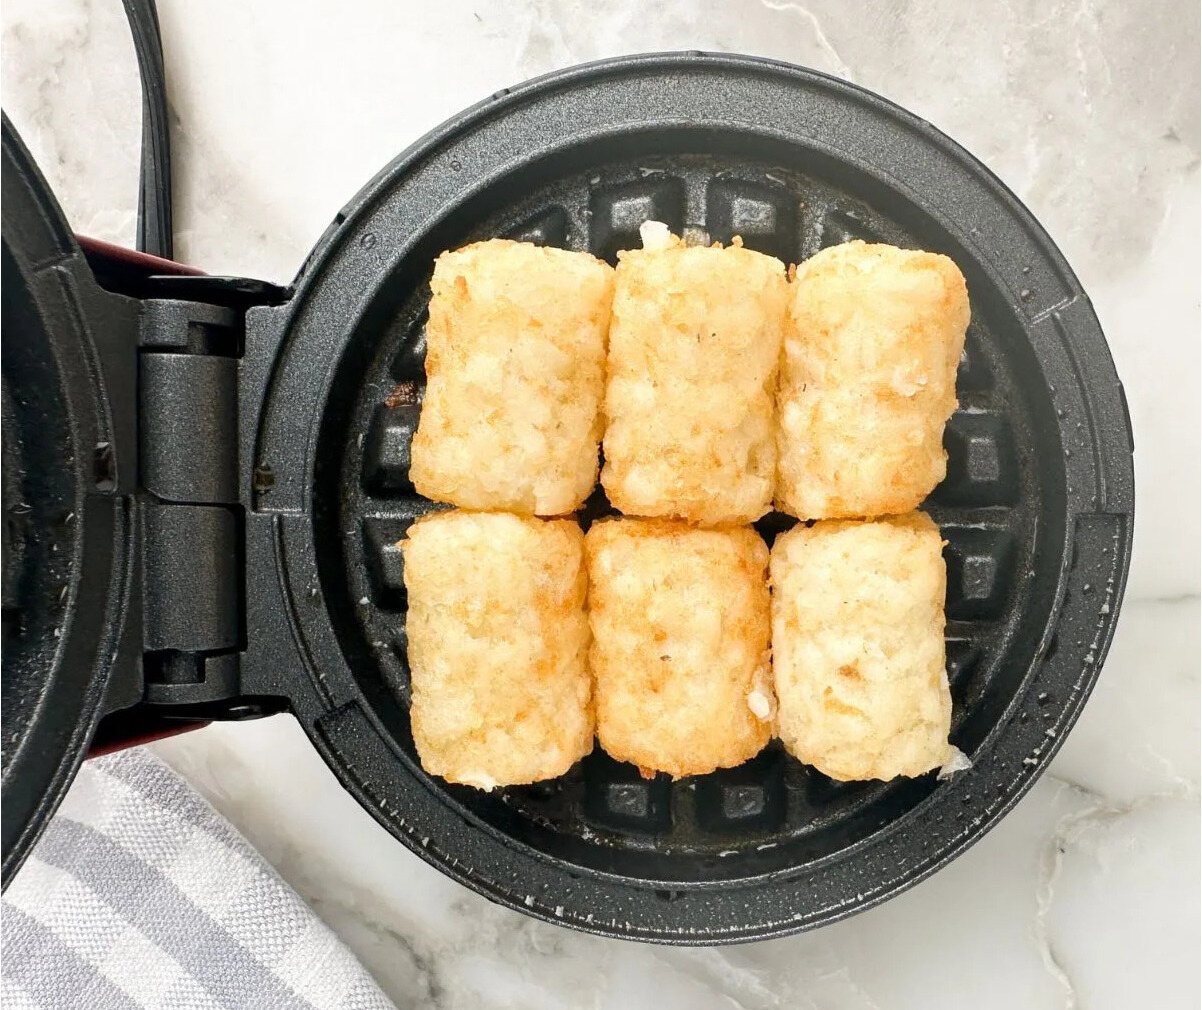 How To Cook Tater Tots On A Waffle Iron